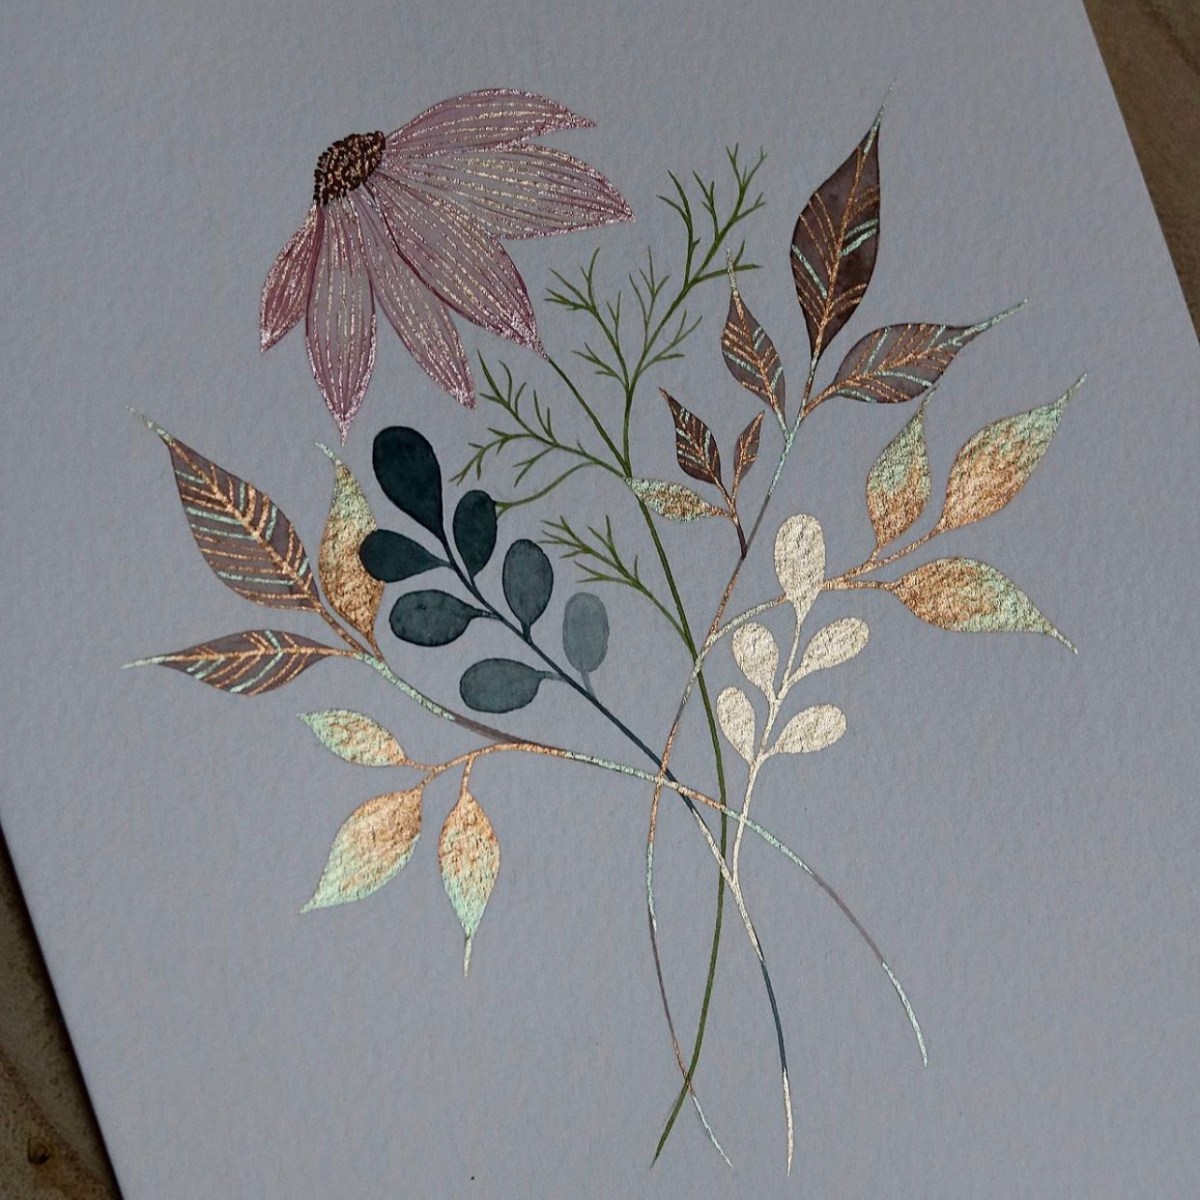 A botanical watercolor piece featuring my favorite metallic